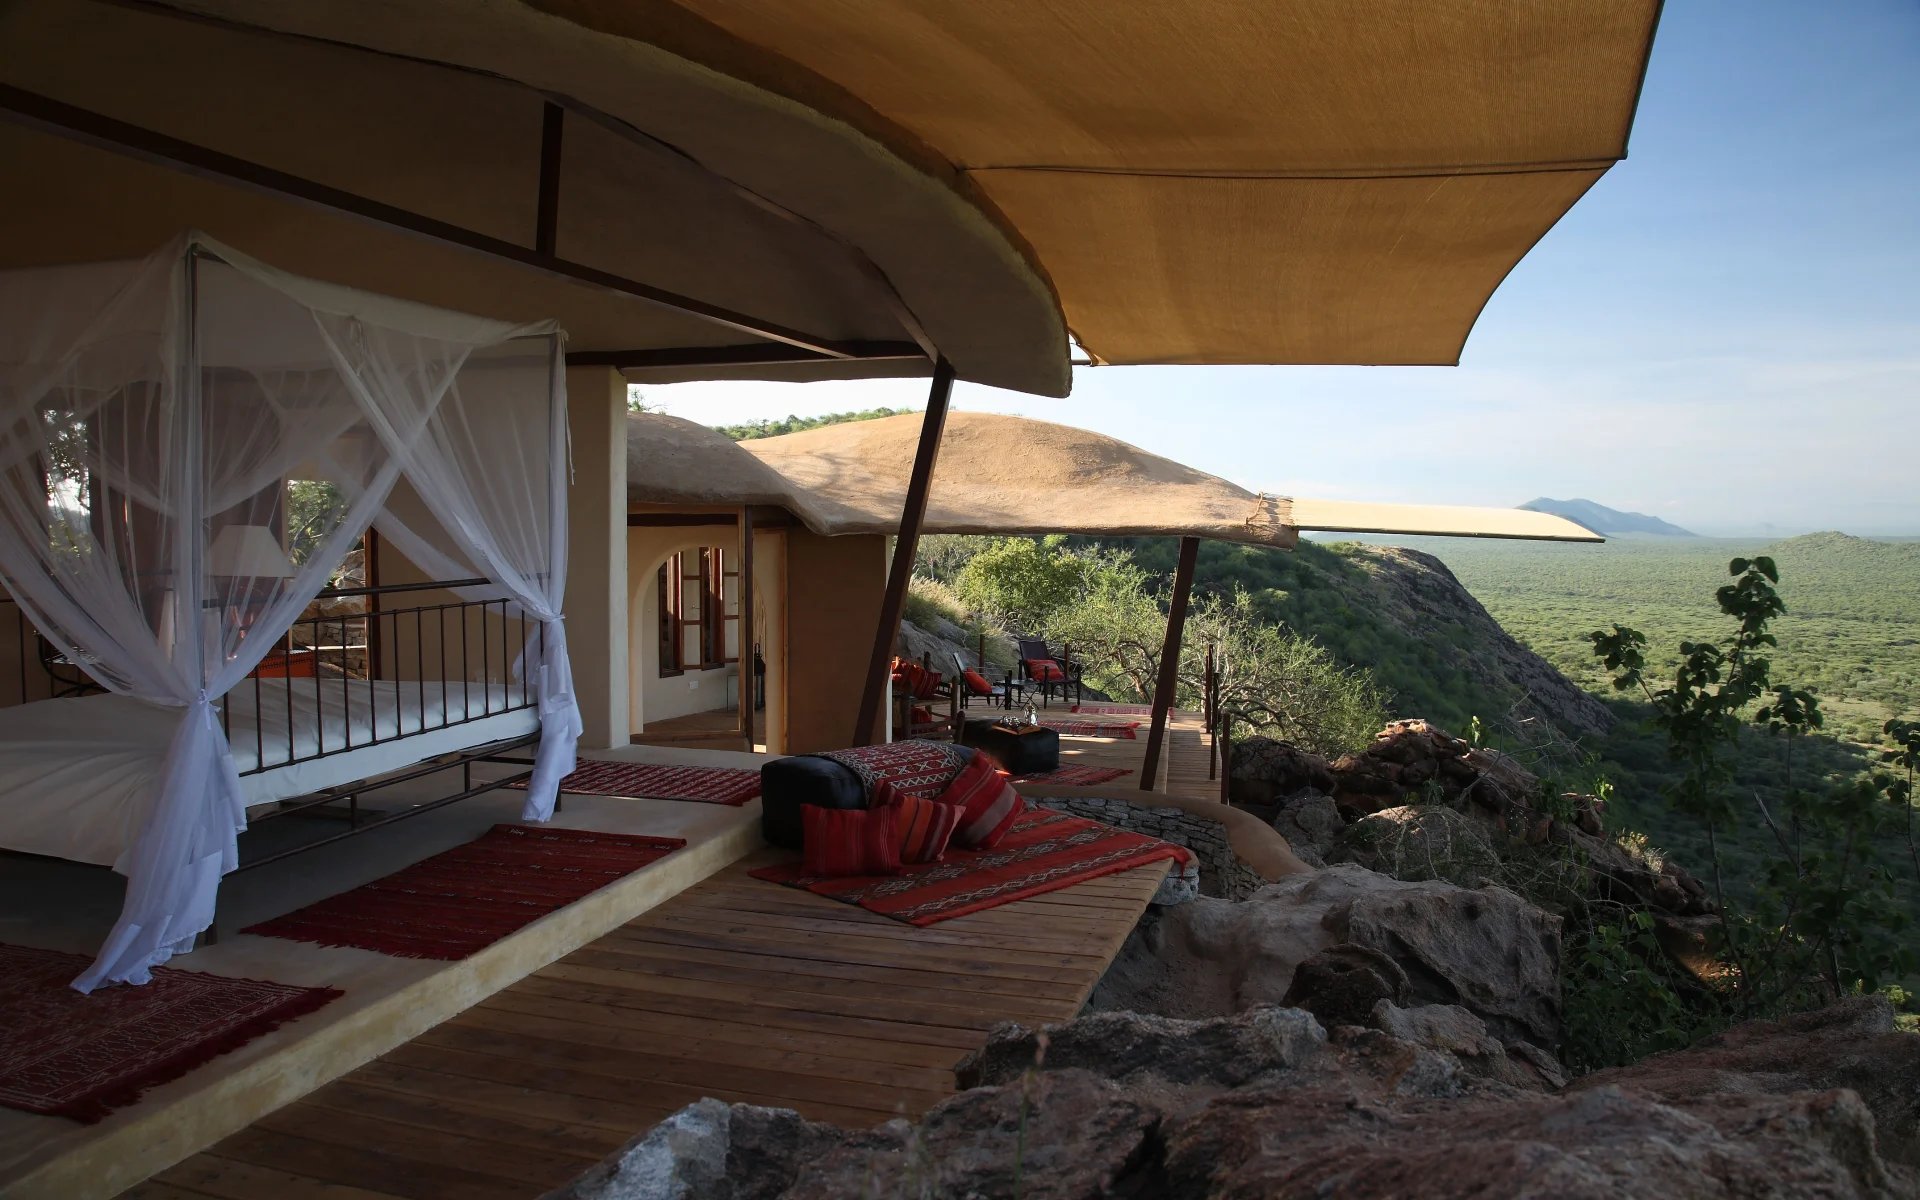 One of the rooms at Saruni Samburu overlooks a magnificent scene of the national reserve